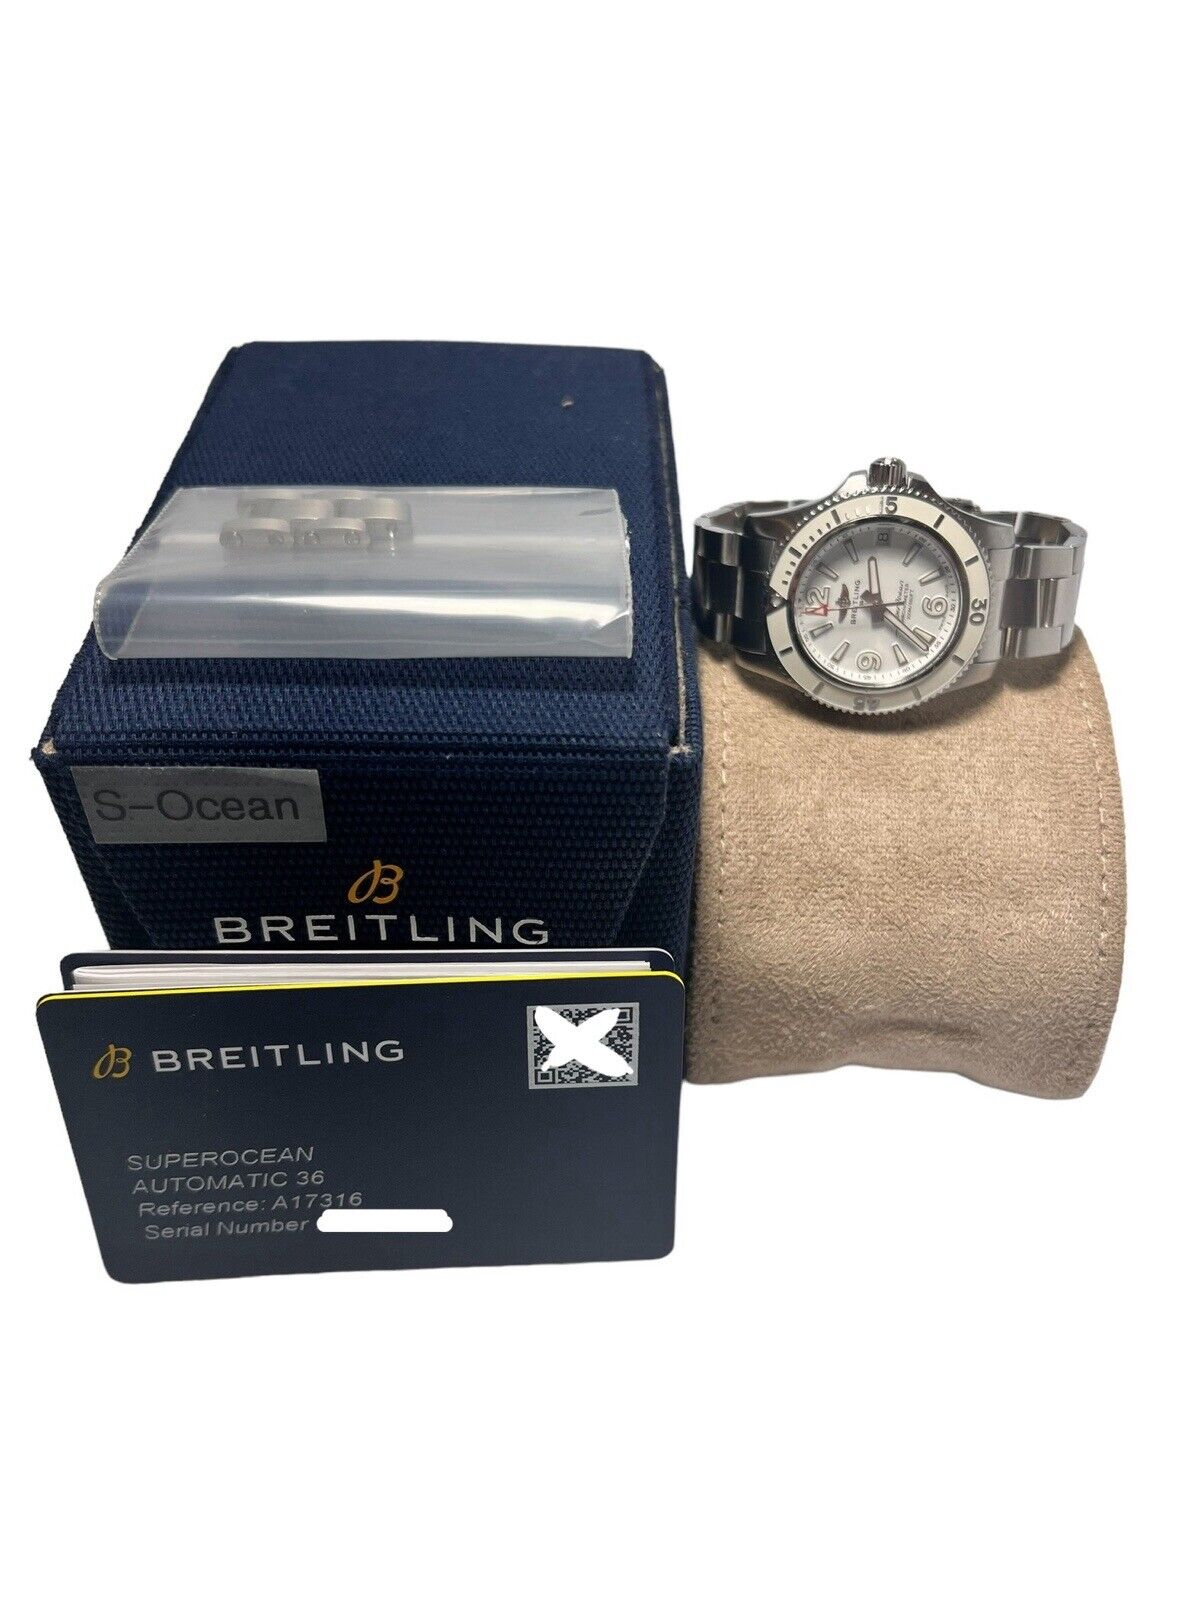 Breitling Superocean Steel White 36mm Automatic Men’s Watch A17316 - Box/Papers